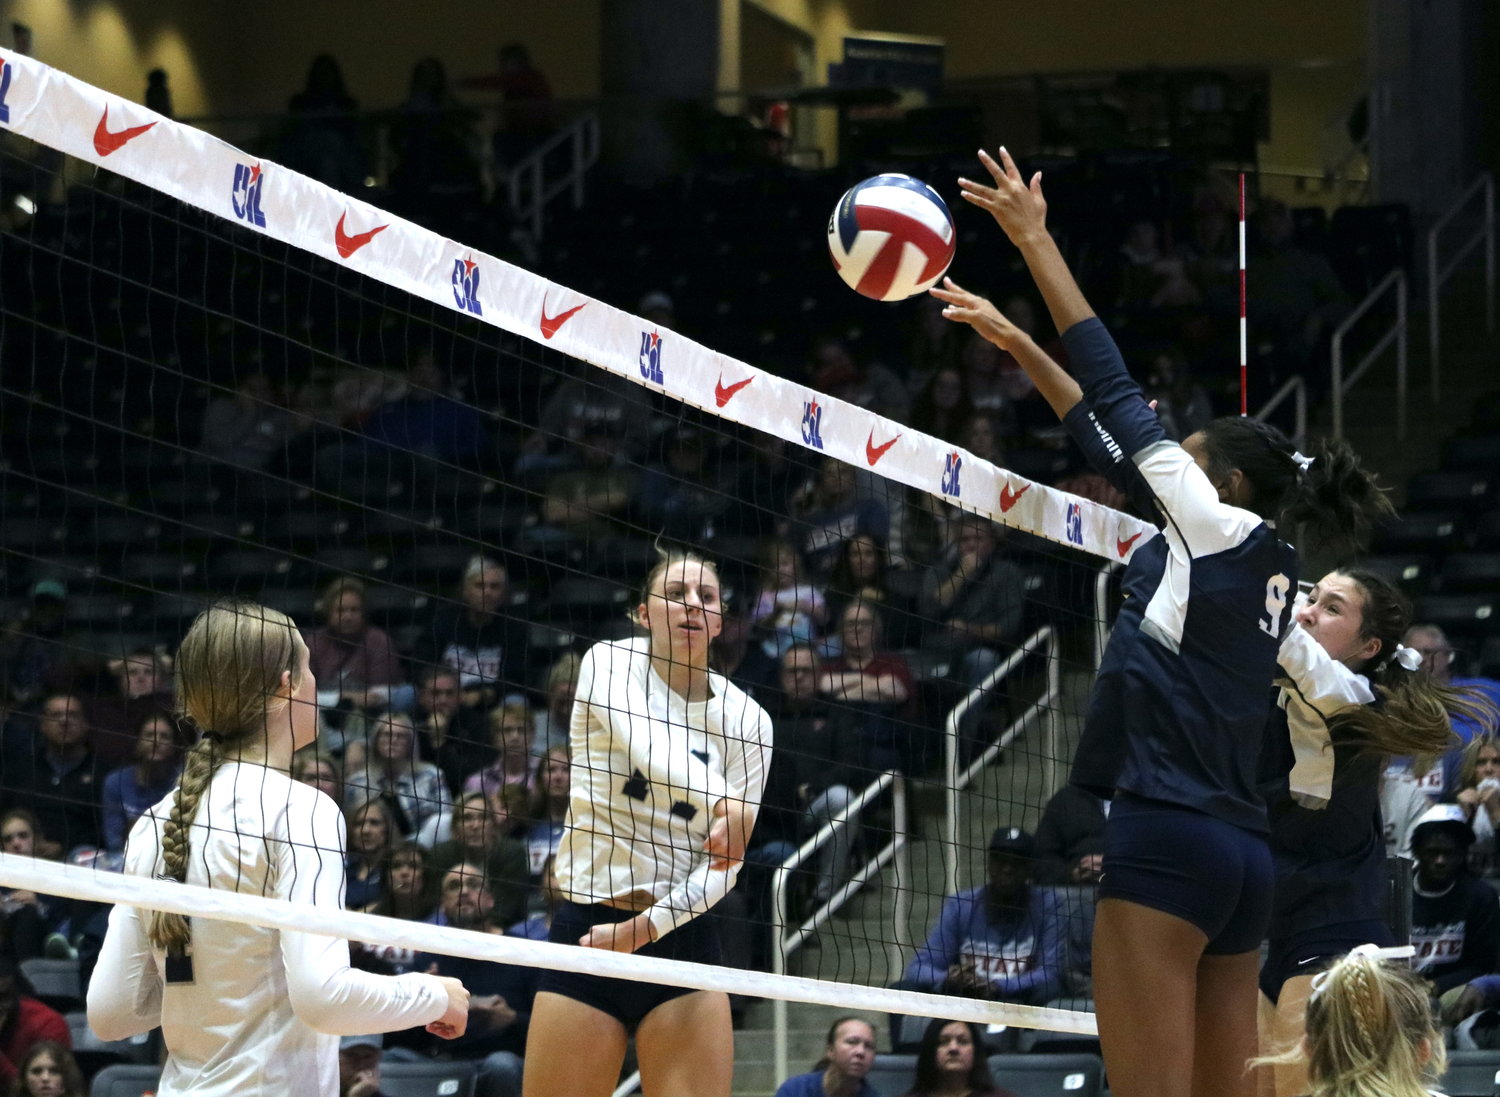 Skylar Skrabanek attempts a kill during Friday's Class 6A State Semifinal between Tompkins and Keller on Friday at the Curtis Culwell Center in Garland.